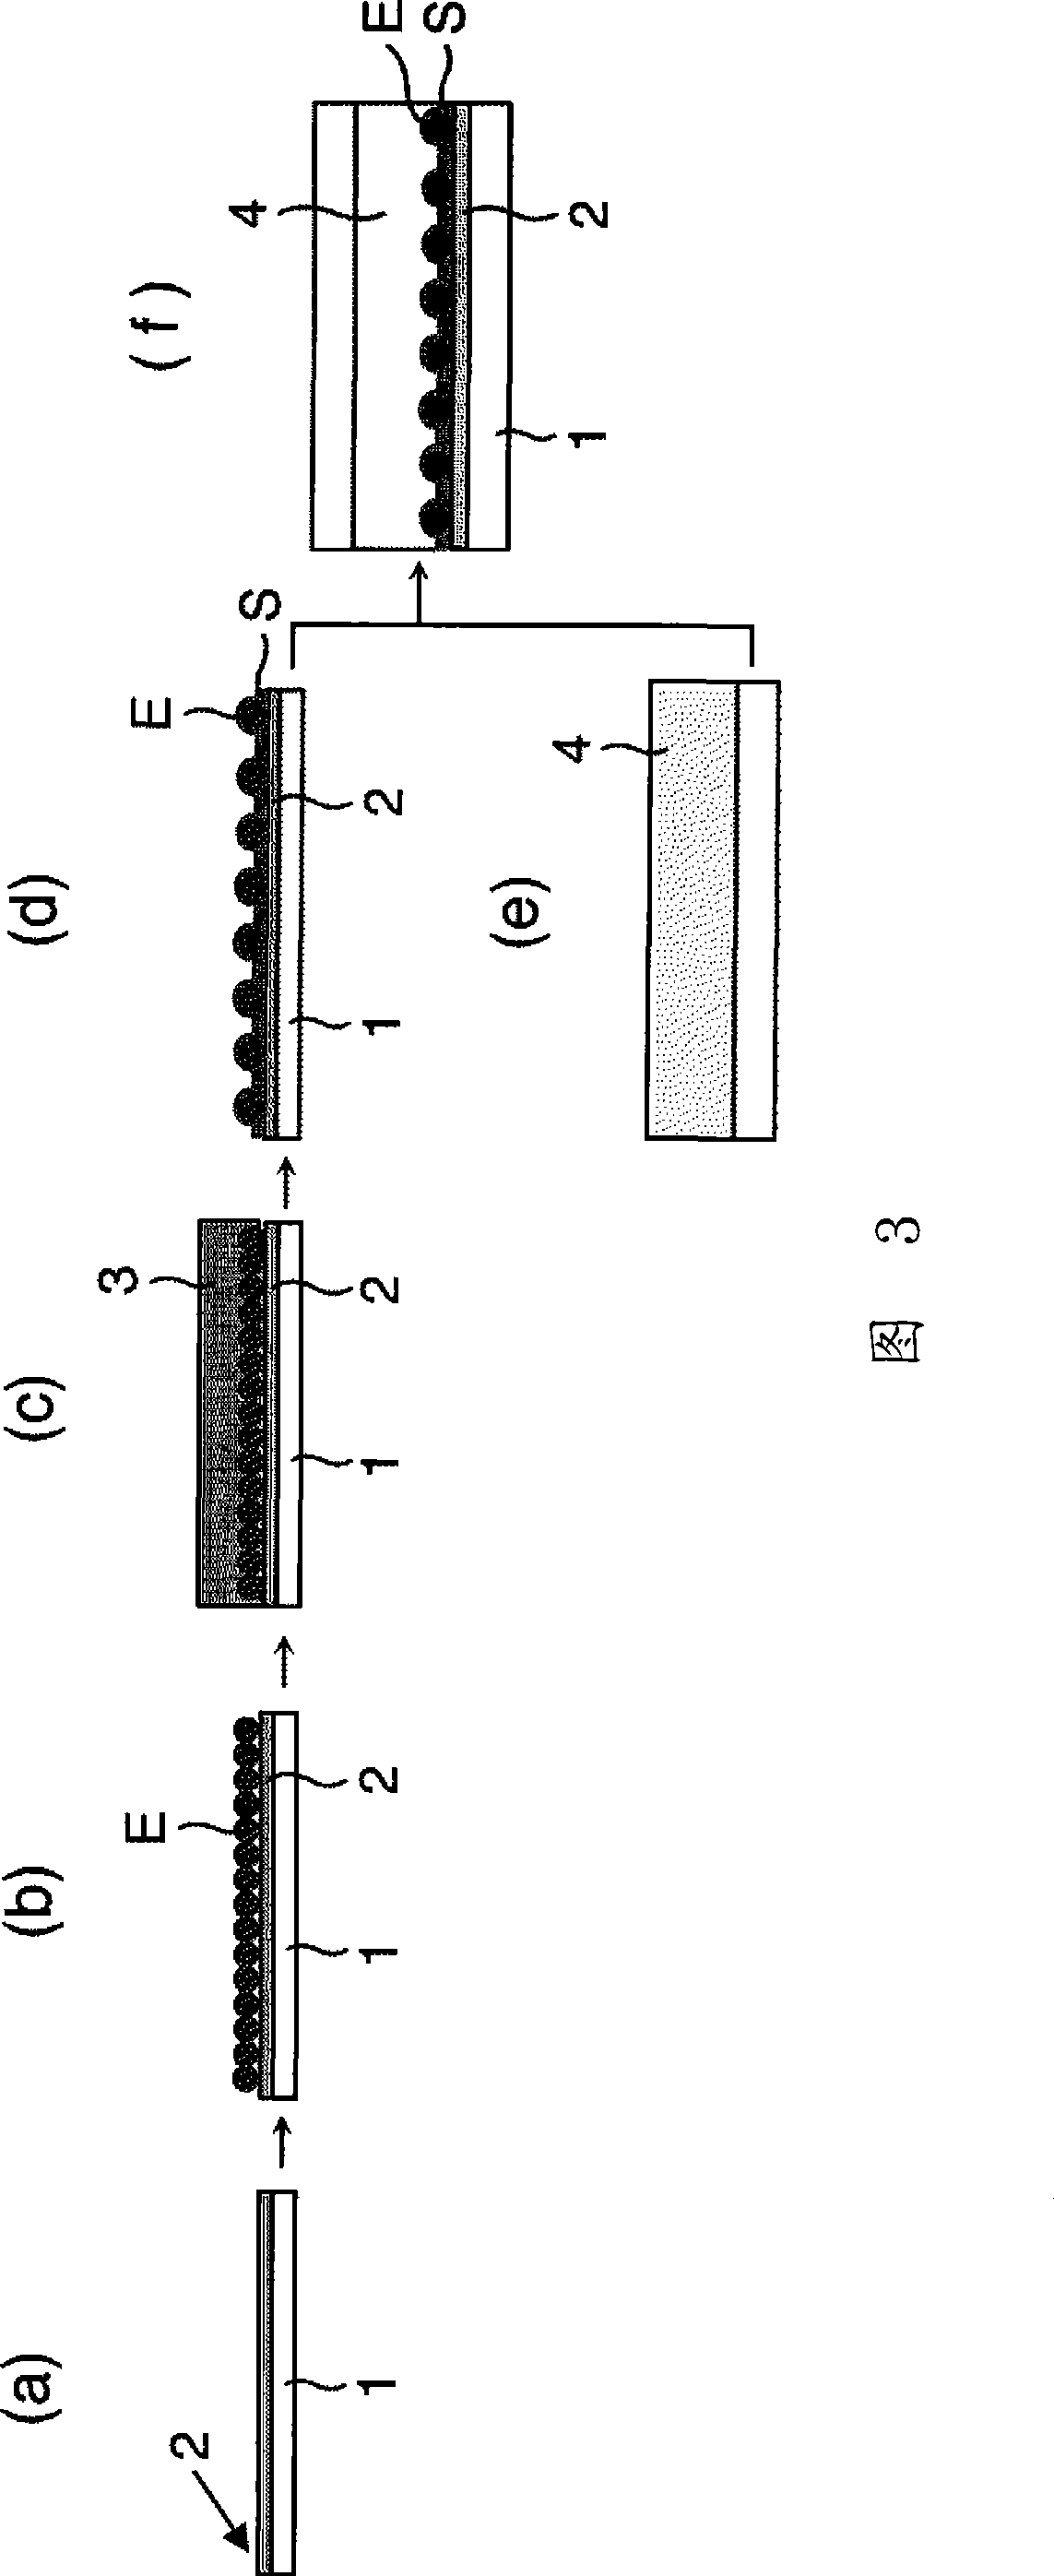 Electroconductive particle placement sheet and anisotropic elctroconductive film